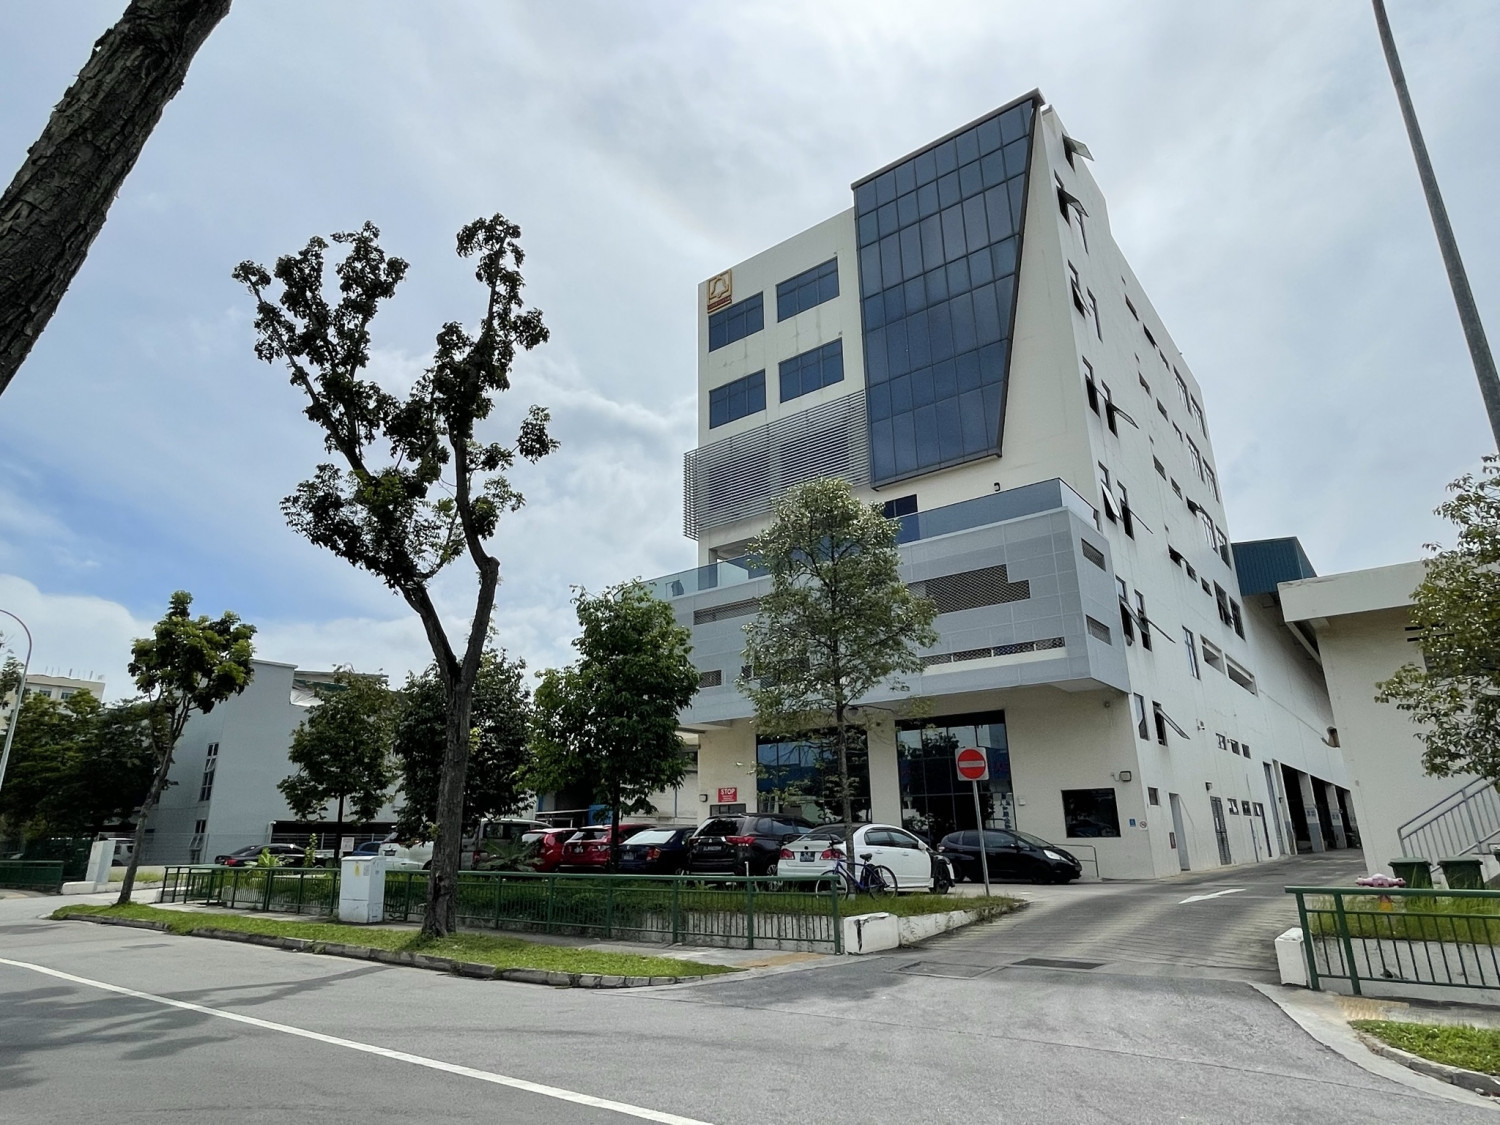 Industrial building at Tuas Avenue 10 for sale at $10 mil - Property News